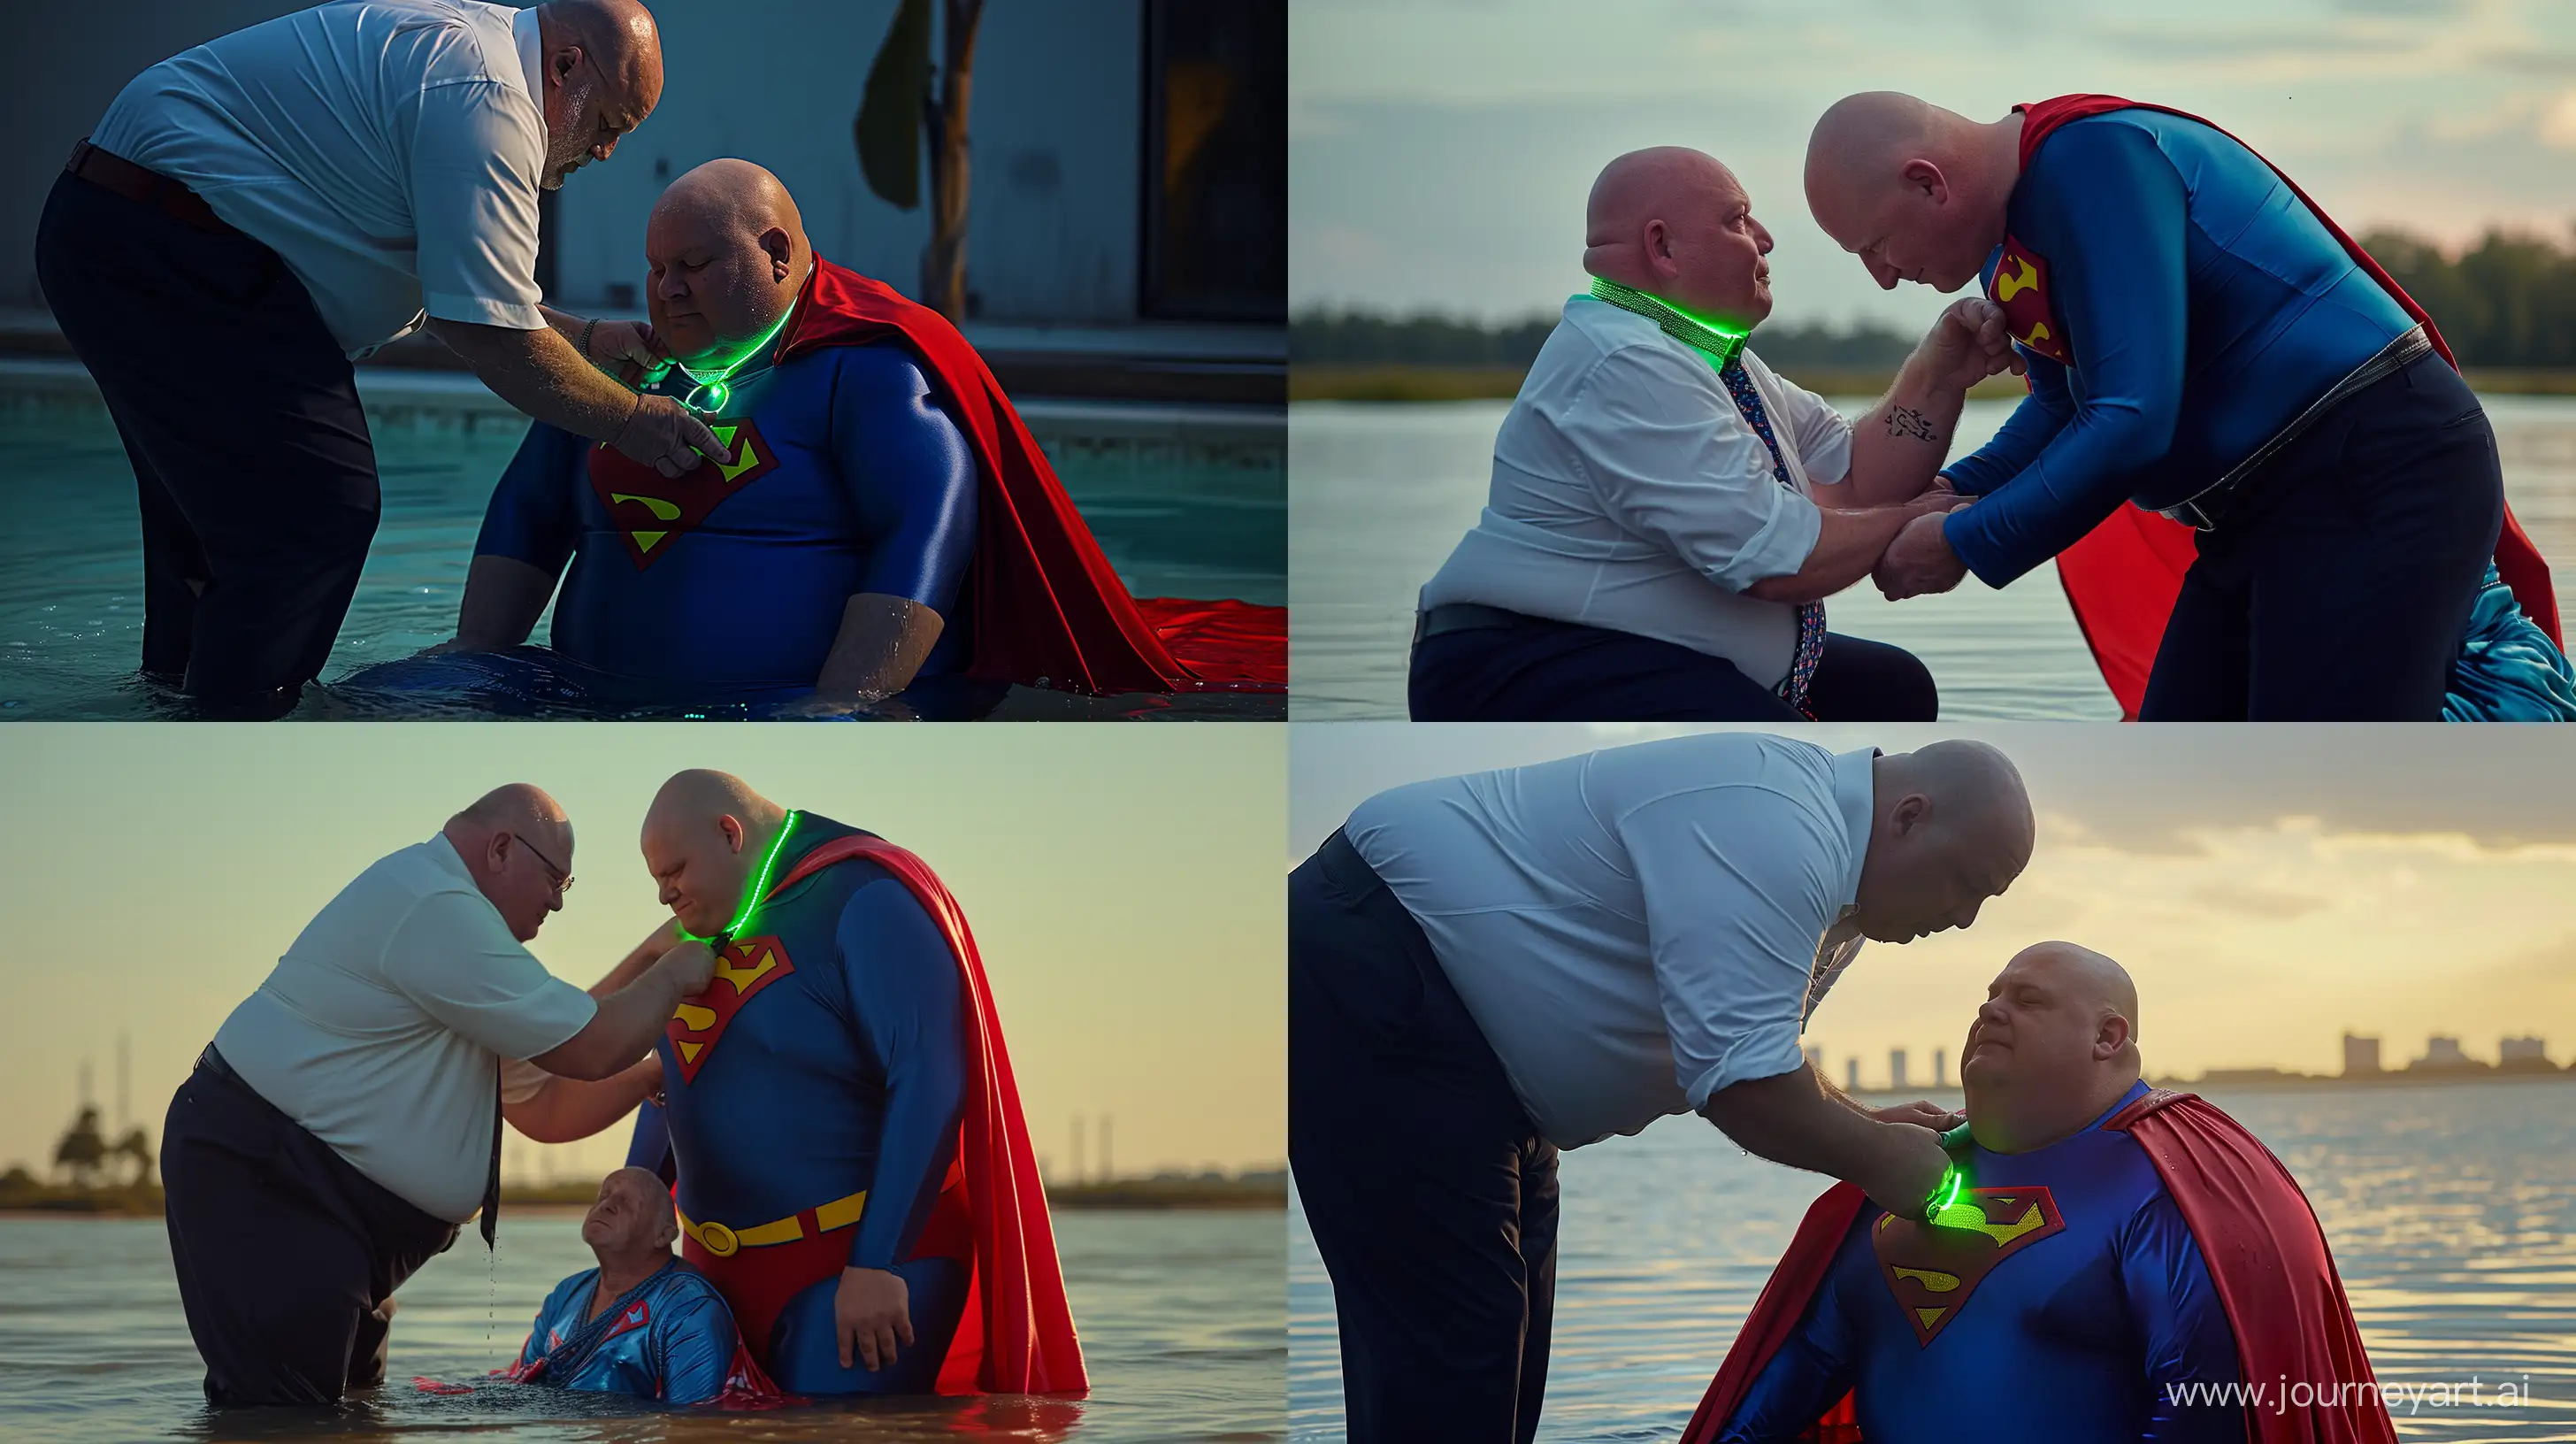 Elderly-Friends-Playful-Water-Adventure-with-SupermanThemed-Surprises